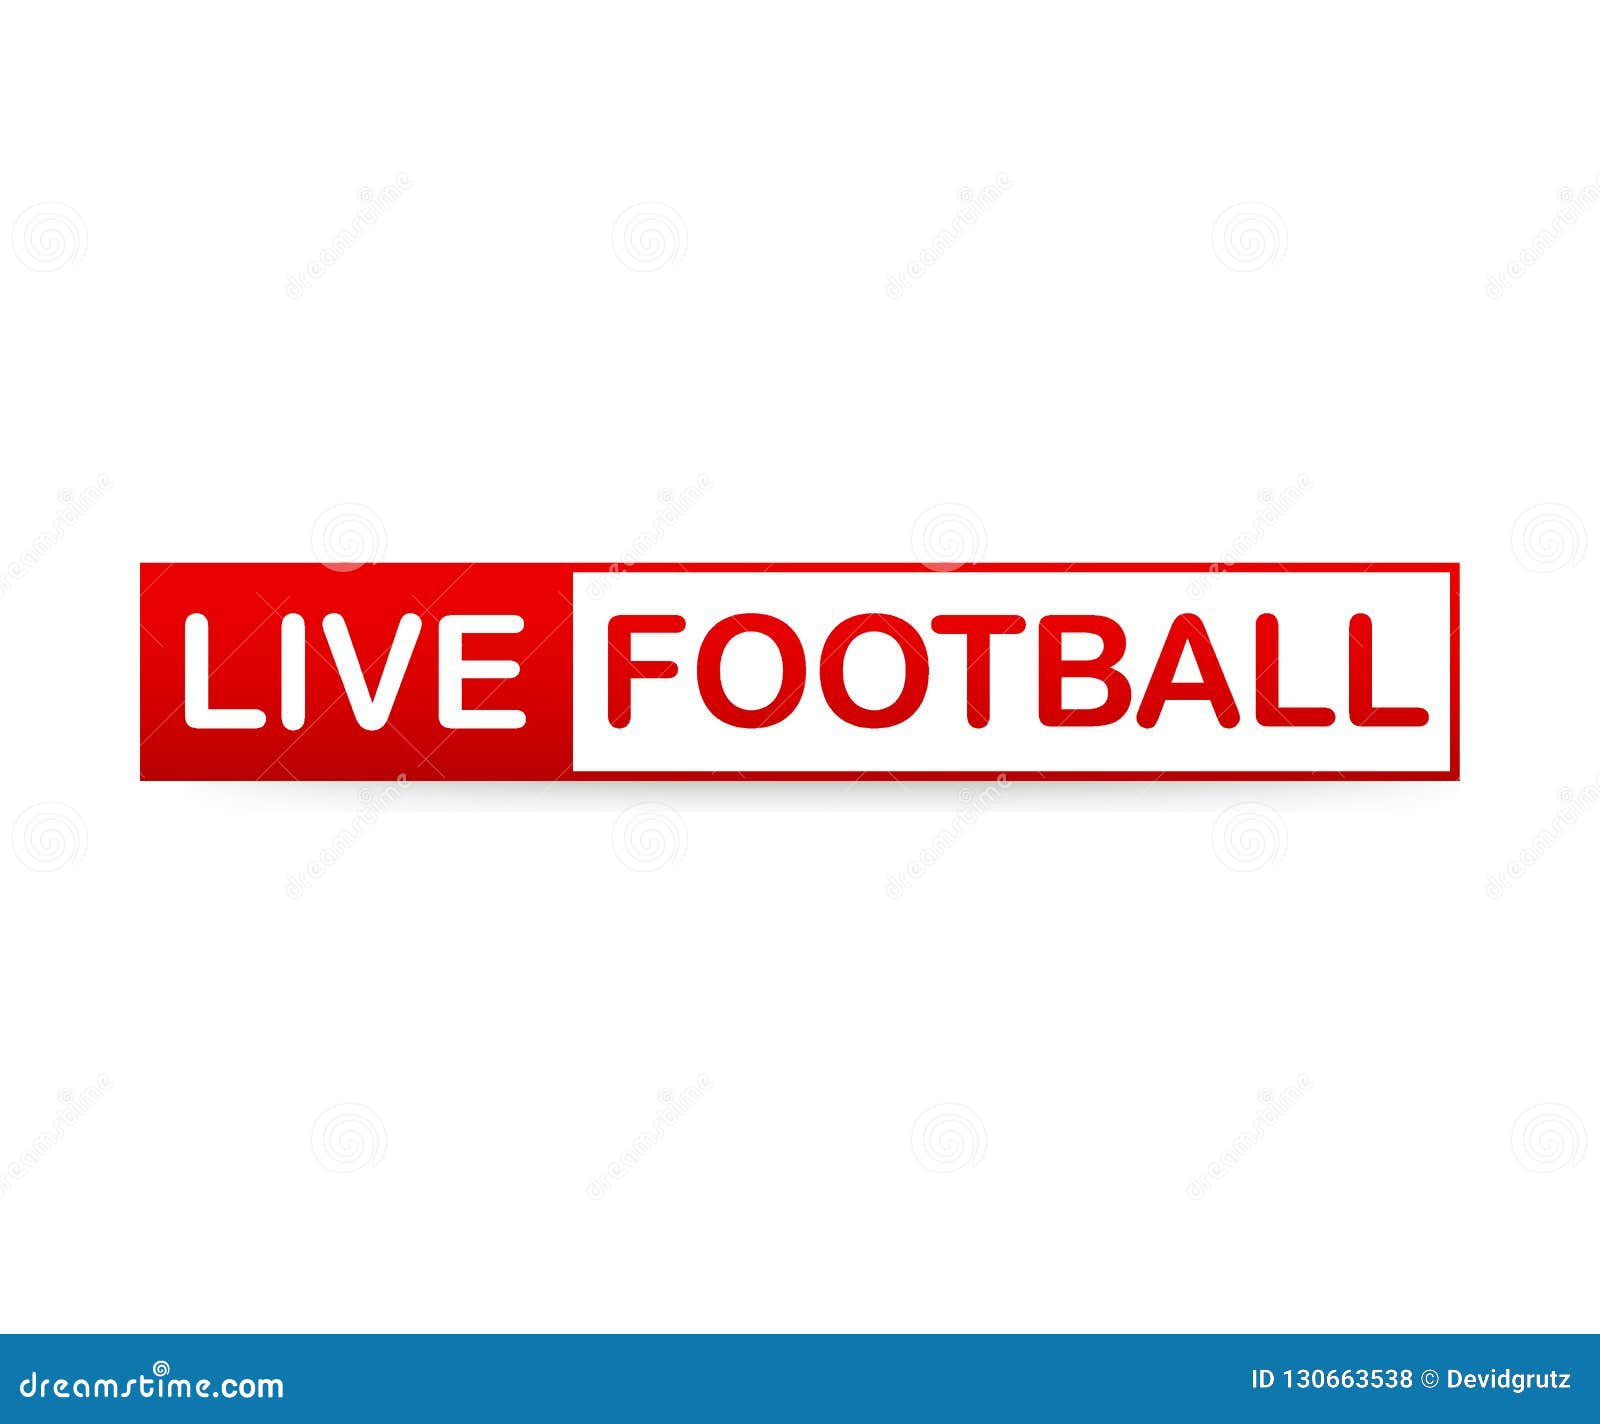 Live Football Streaming Icon, Badge, Button for Broadcasting or Online Football Stream